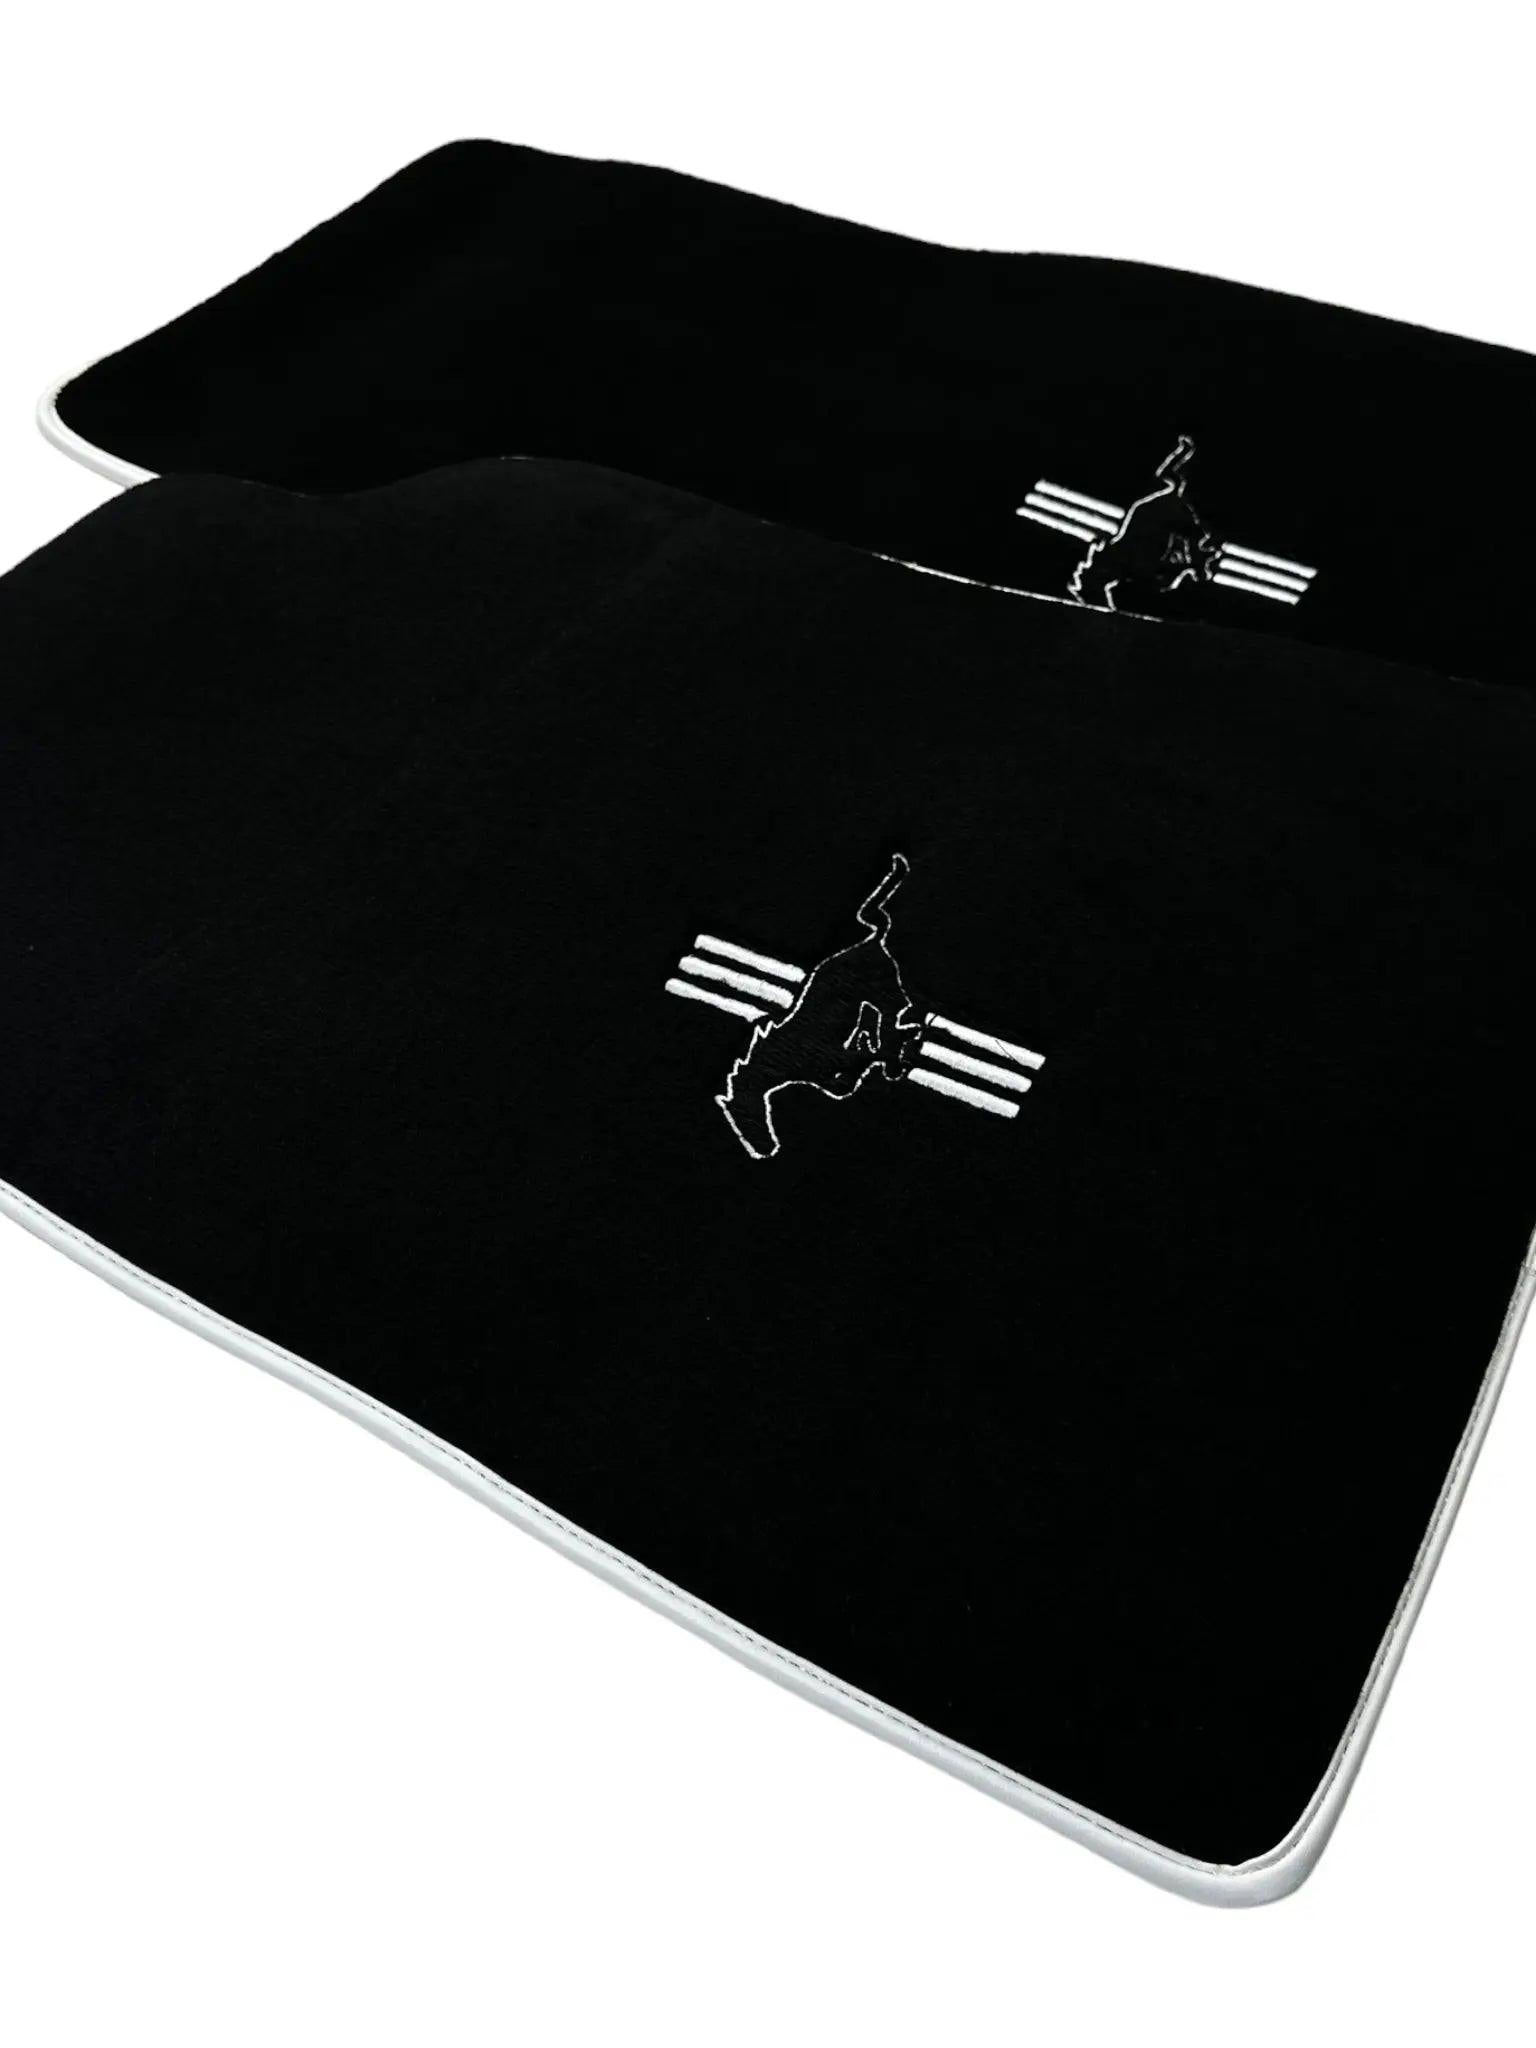 Black Floor Mats with White Trim For Ford Mustang V (2004-2010) With Pony